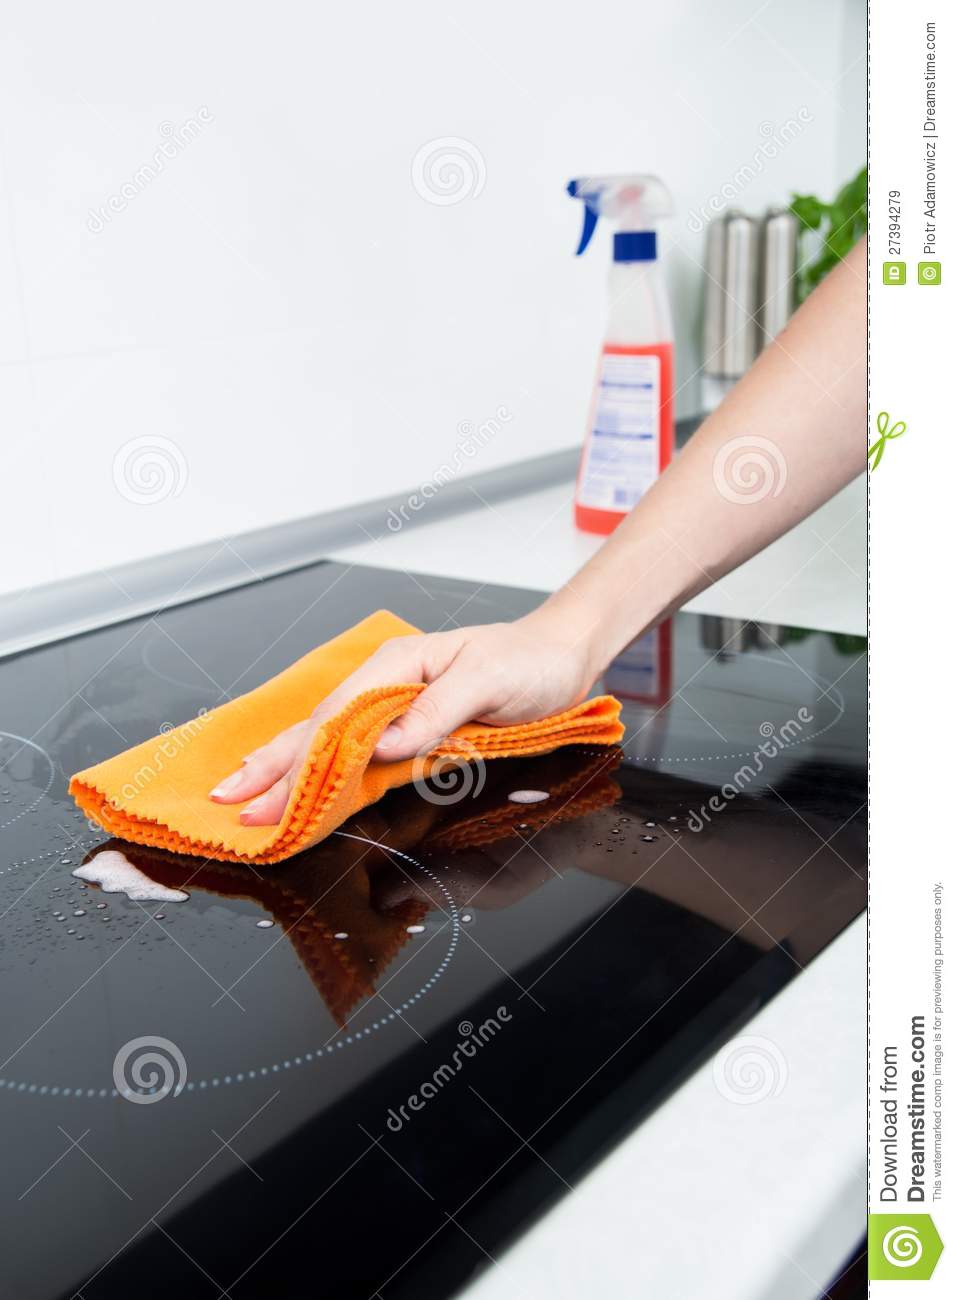 Hand Cleaning Induction Stove Royalty Free Stock Images   Image    